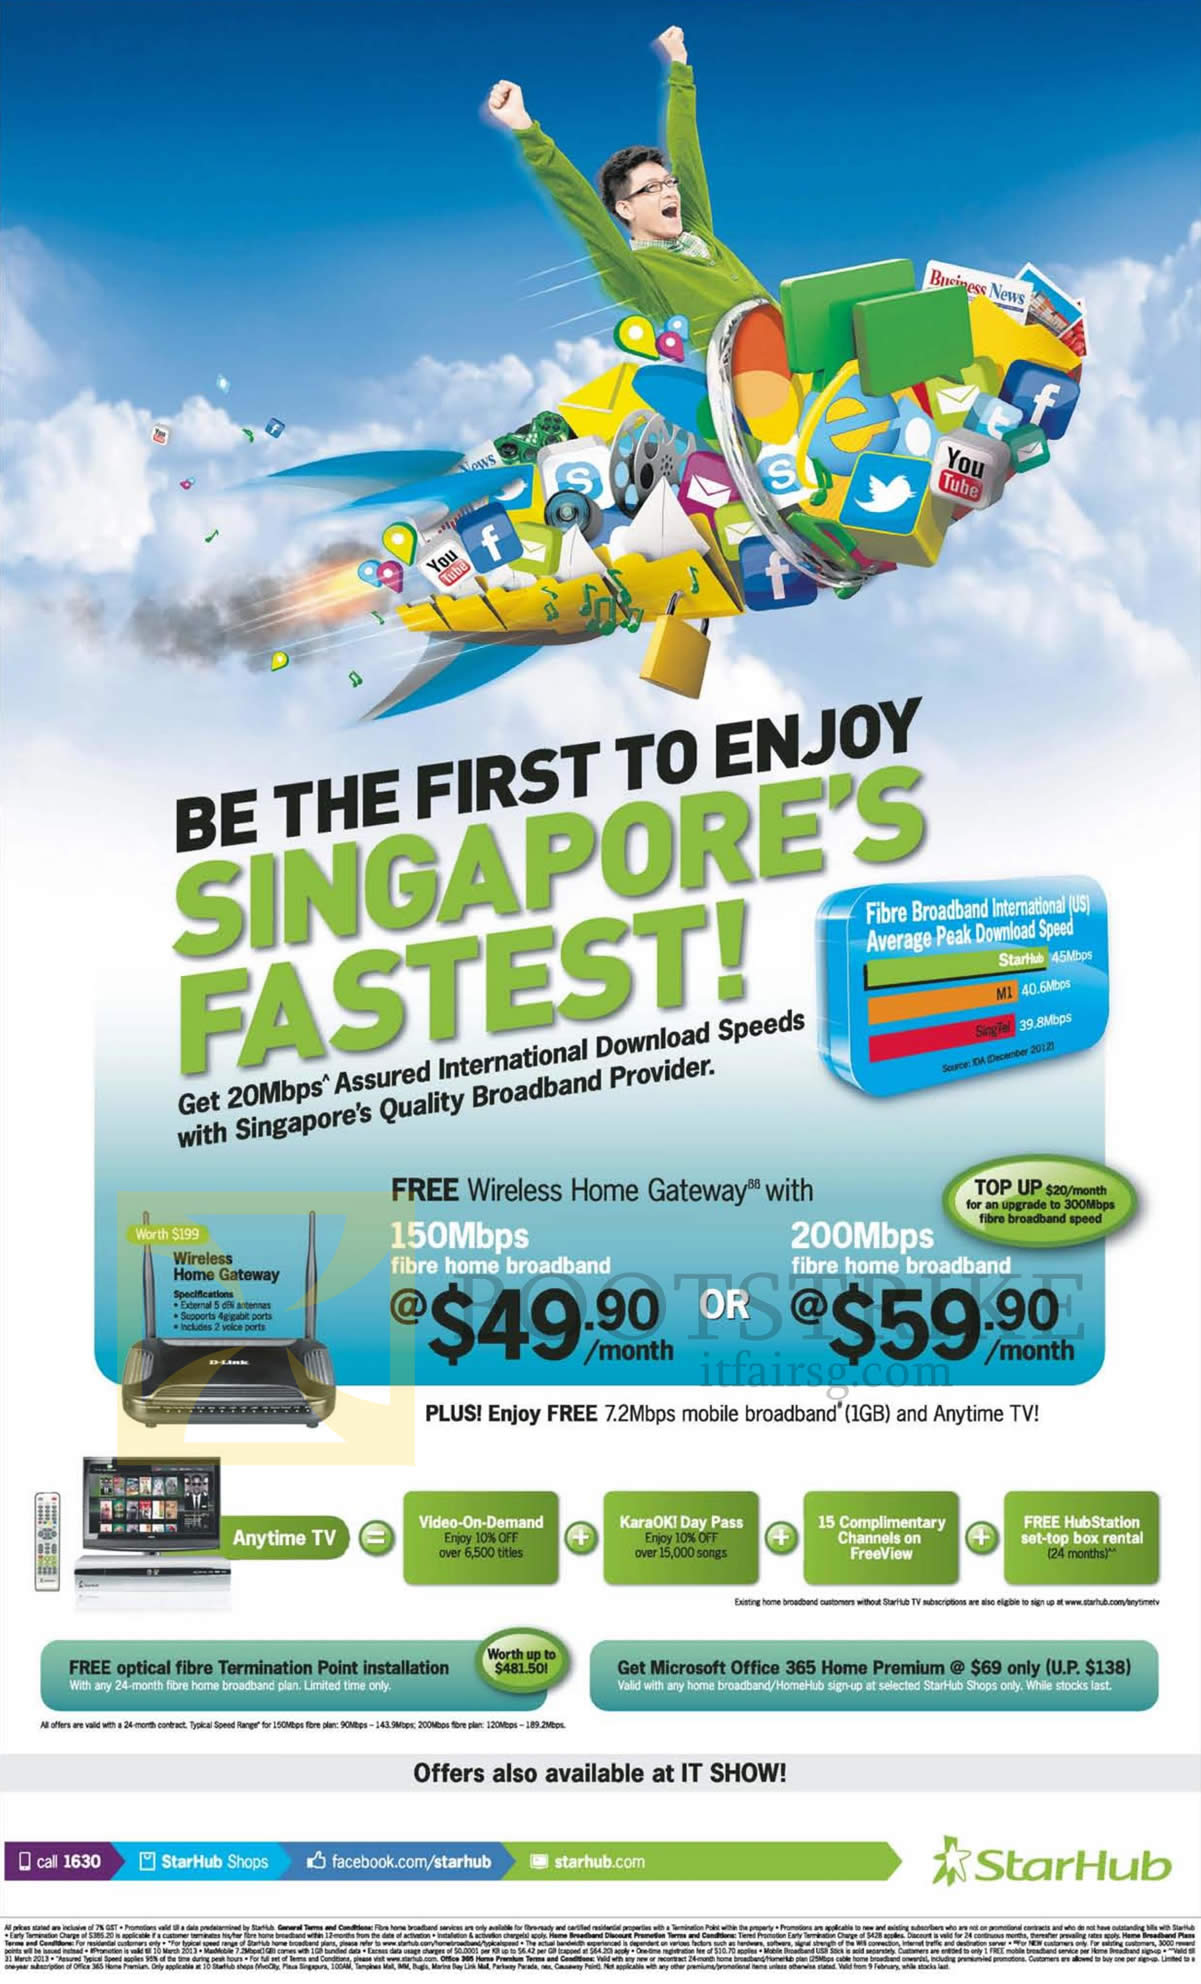 IT SHOW 2013 price list image brochure of Starhub Broadband Fibre 150Mbps, 200Mbps Free Wireless Home Gateway, Anytime TV, Free Optical Fibre Terminal Point Installation, Microsoft Office 365